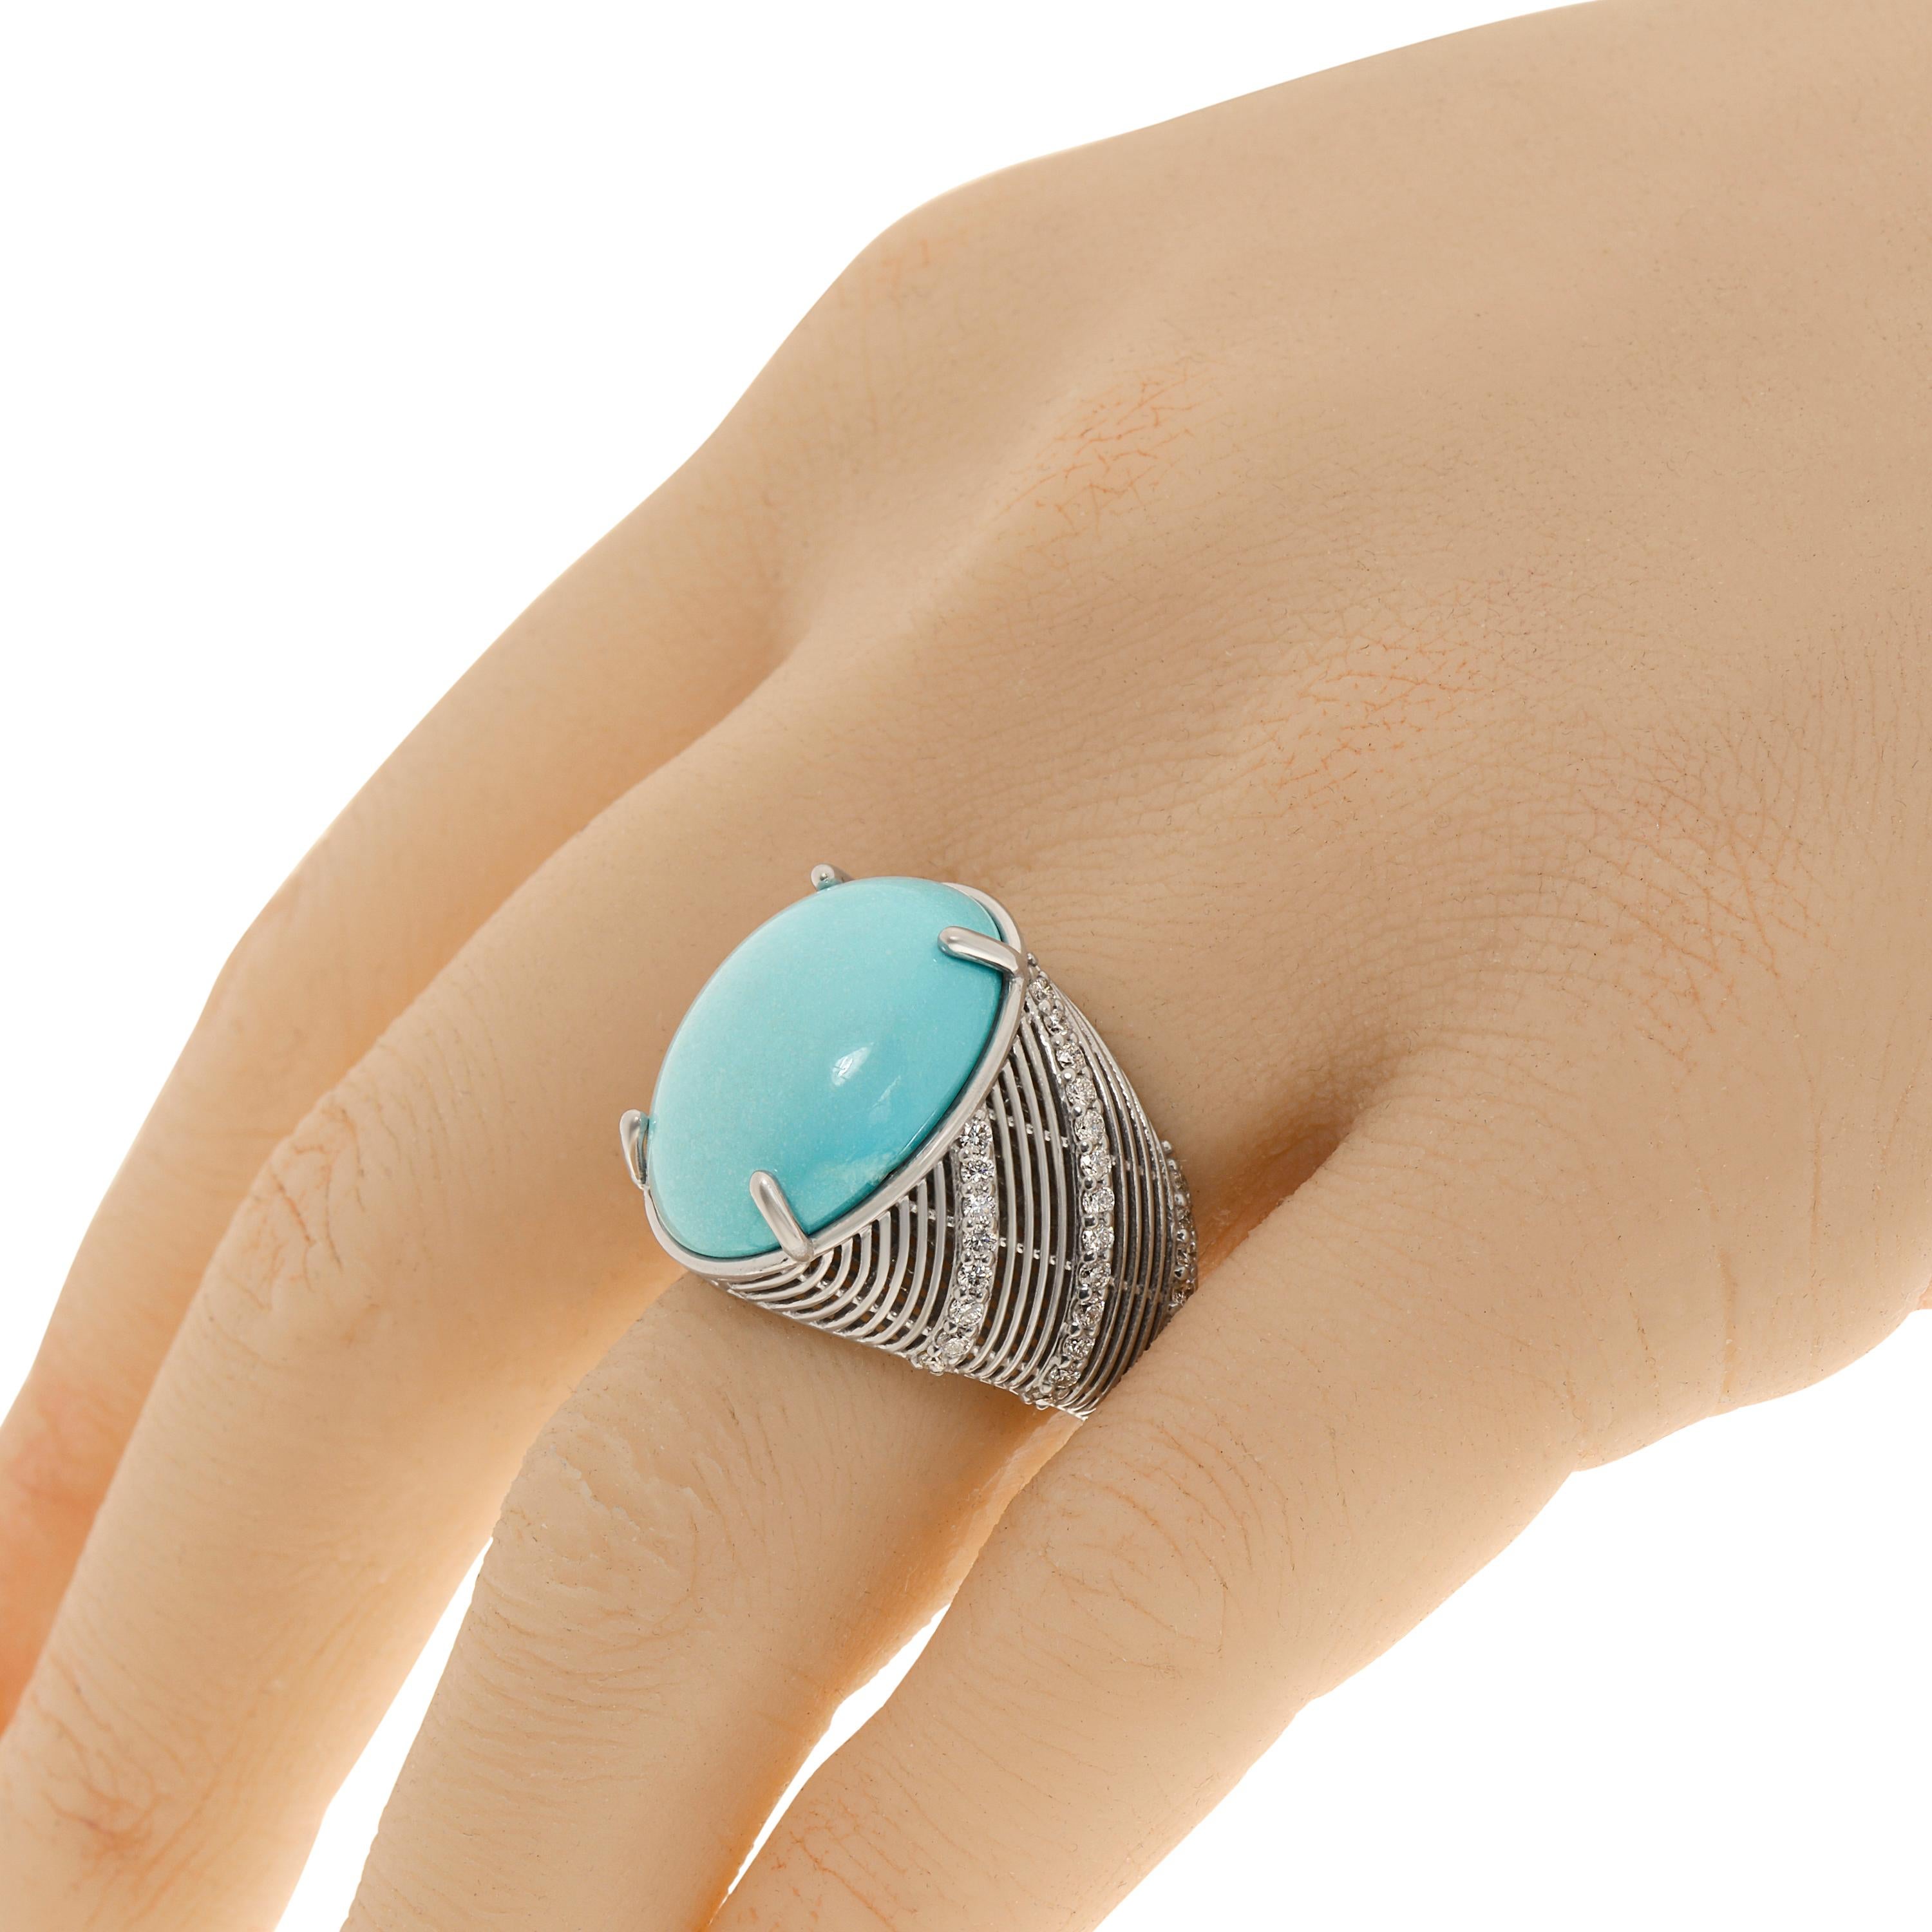 Zydo 18K white gold statement ring features an oversized turquoise gemstone with 0.80ct. tw. diamonds. The ring size is 6.5 (53.1). The decoration size is 7/8